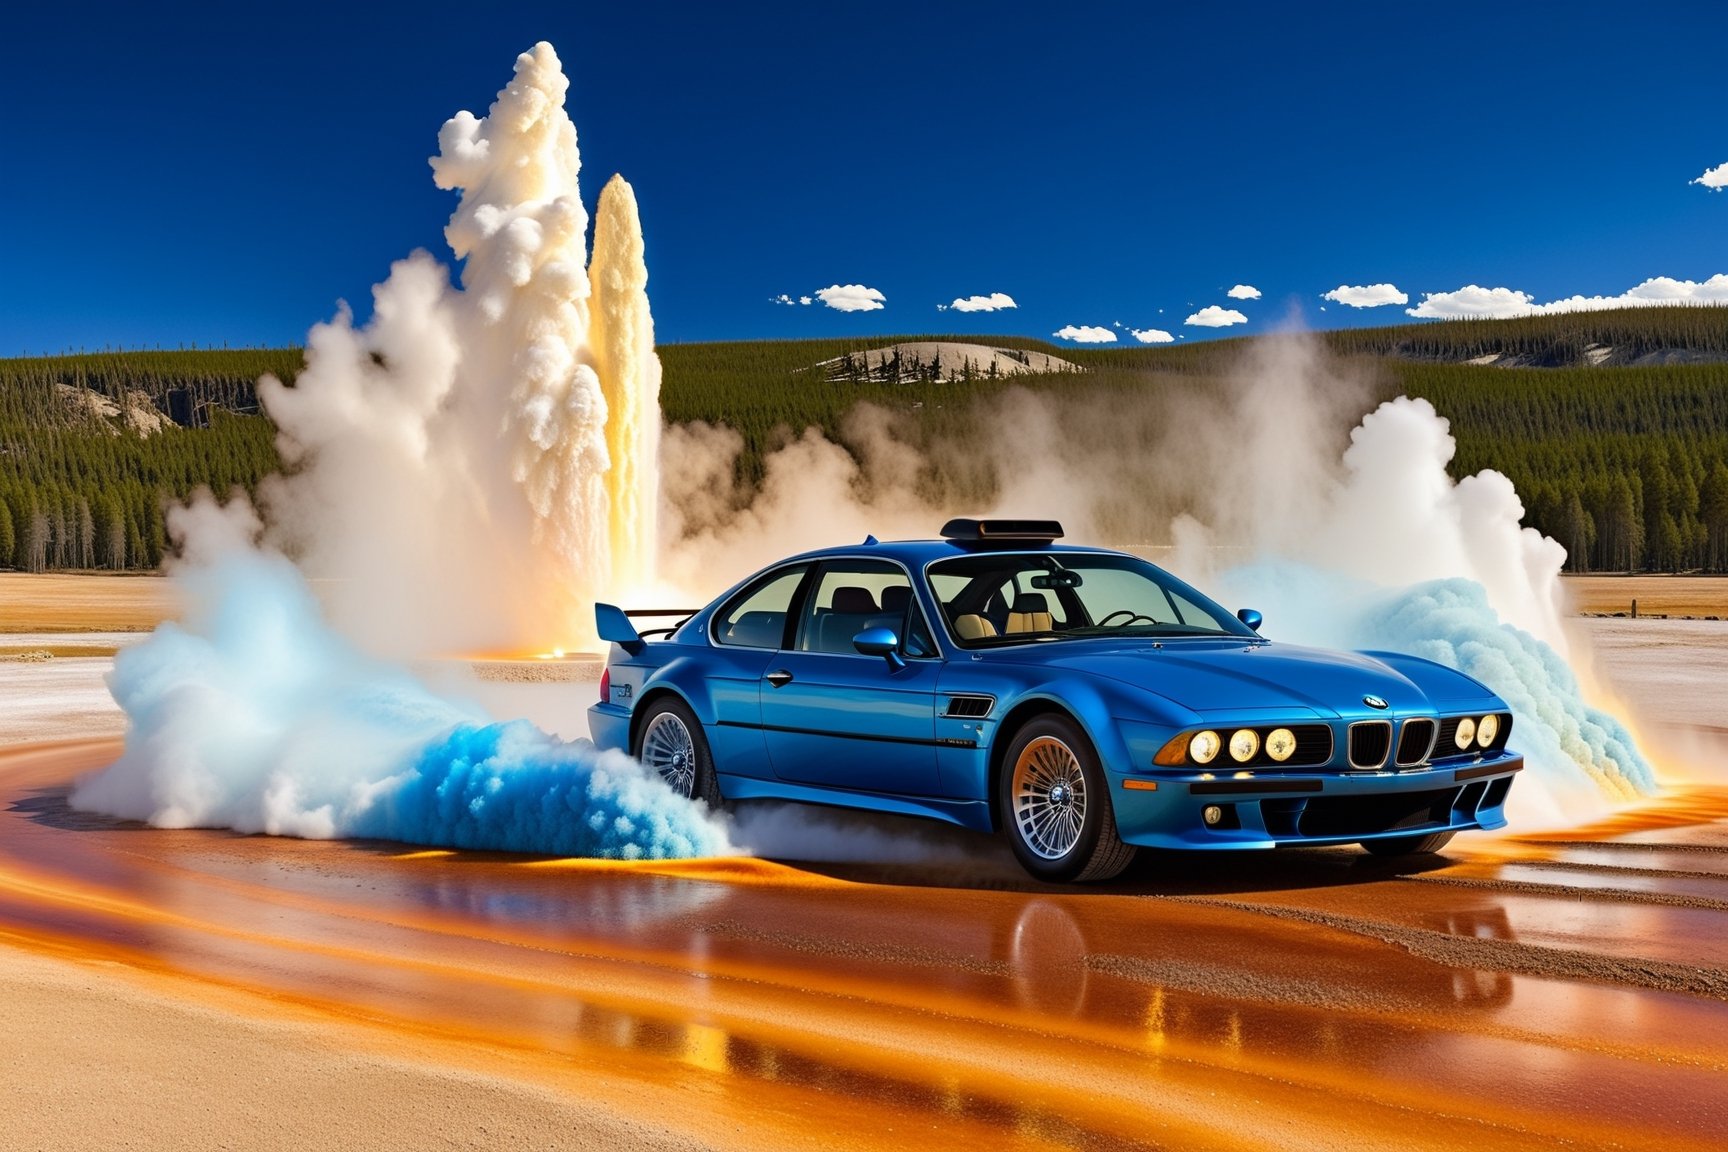 Ultra-realistic photo of racing car \(BMW Gina 2008\) in front of Old Faithful in Yellowstone,(stunning racing car decals:1.5),(body color:Cosmic Carbon Gray with Blue Glow),shiny spinning wheels,(wheel color: Black Chrome),glossy and luxurious alloy wheel,(bright turned on symmetrical head lights),silhouette in driver's seat,by Marcello Gandini,Giorgetto Giugiaro,Leonardo Fioravanti and Alex Issigonis,(backdrop: Old Faithful in Yellowstone,outdoors,multiple boys,sky, day,tree,scenery,6+boys,realistic,photo background,many people watching smoke eruption,mostly white soil with some brown),(BMW focus:1.5)
BREAK
aesthetic,rule of thirds,depth of perspective,perfect composition,studio photo,trending on artstation,cinematic lighting,(Hyper-realistic photography,masterpiece, photorealistic,ultra-detailed,intricate details,16K,sharp focus,high contrast,kodachrome 800,HDR:1.2),photo_b00ster,real_booster,ye11owst0ne,(oldfa1thfu1:1.2),more detail XL